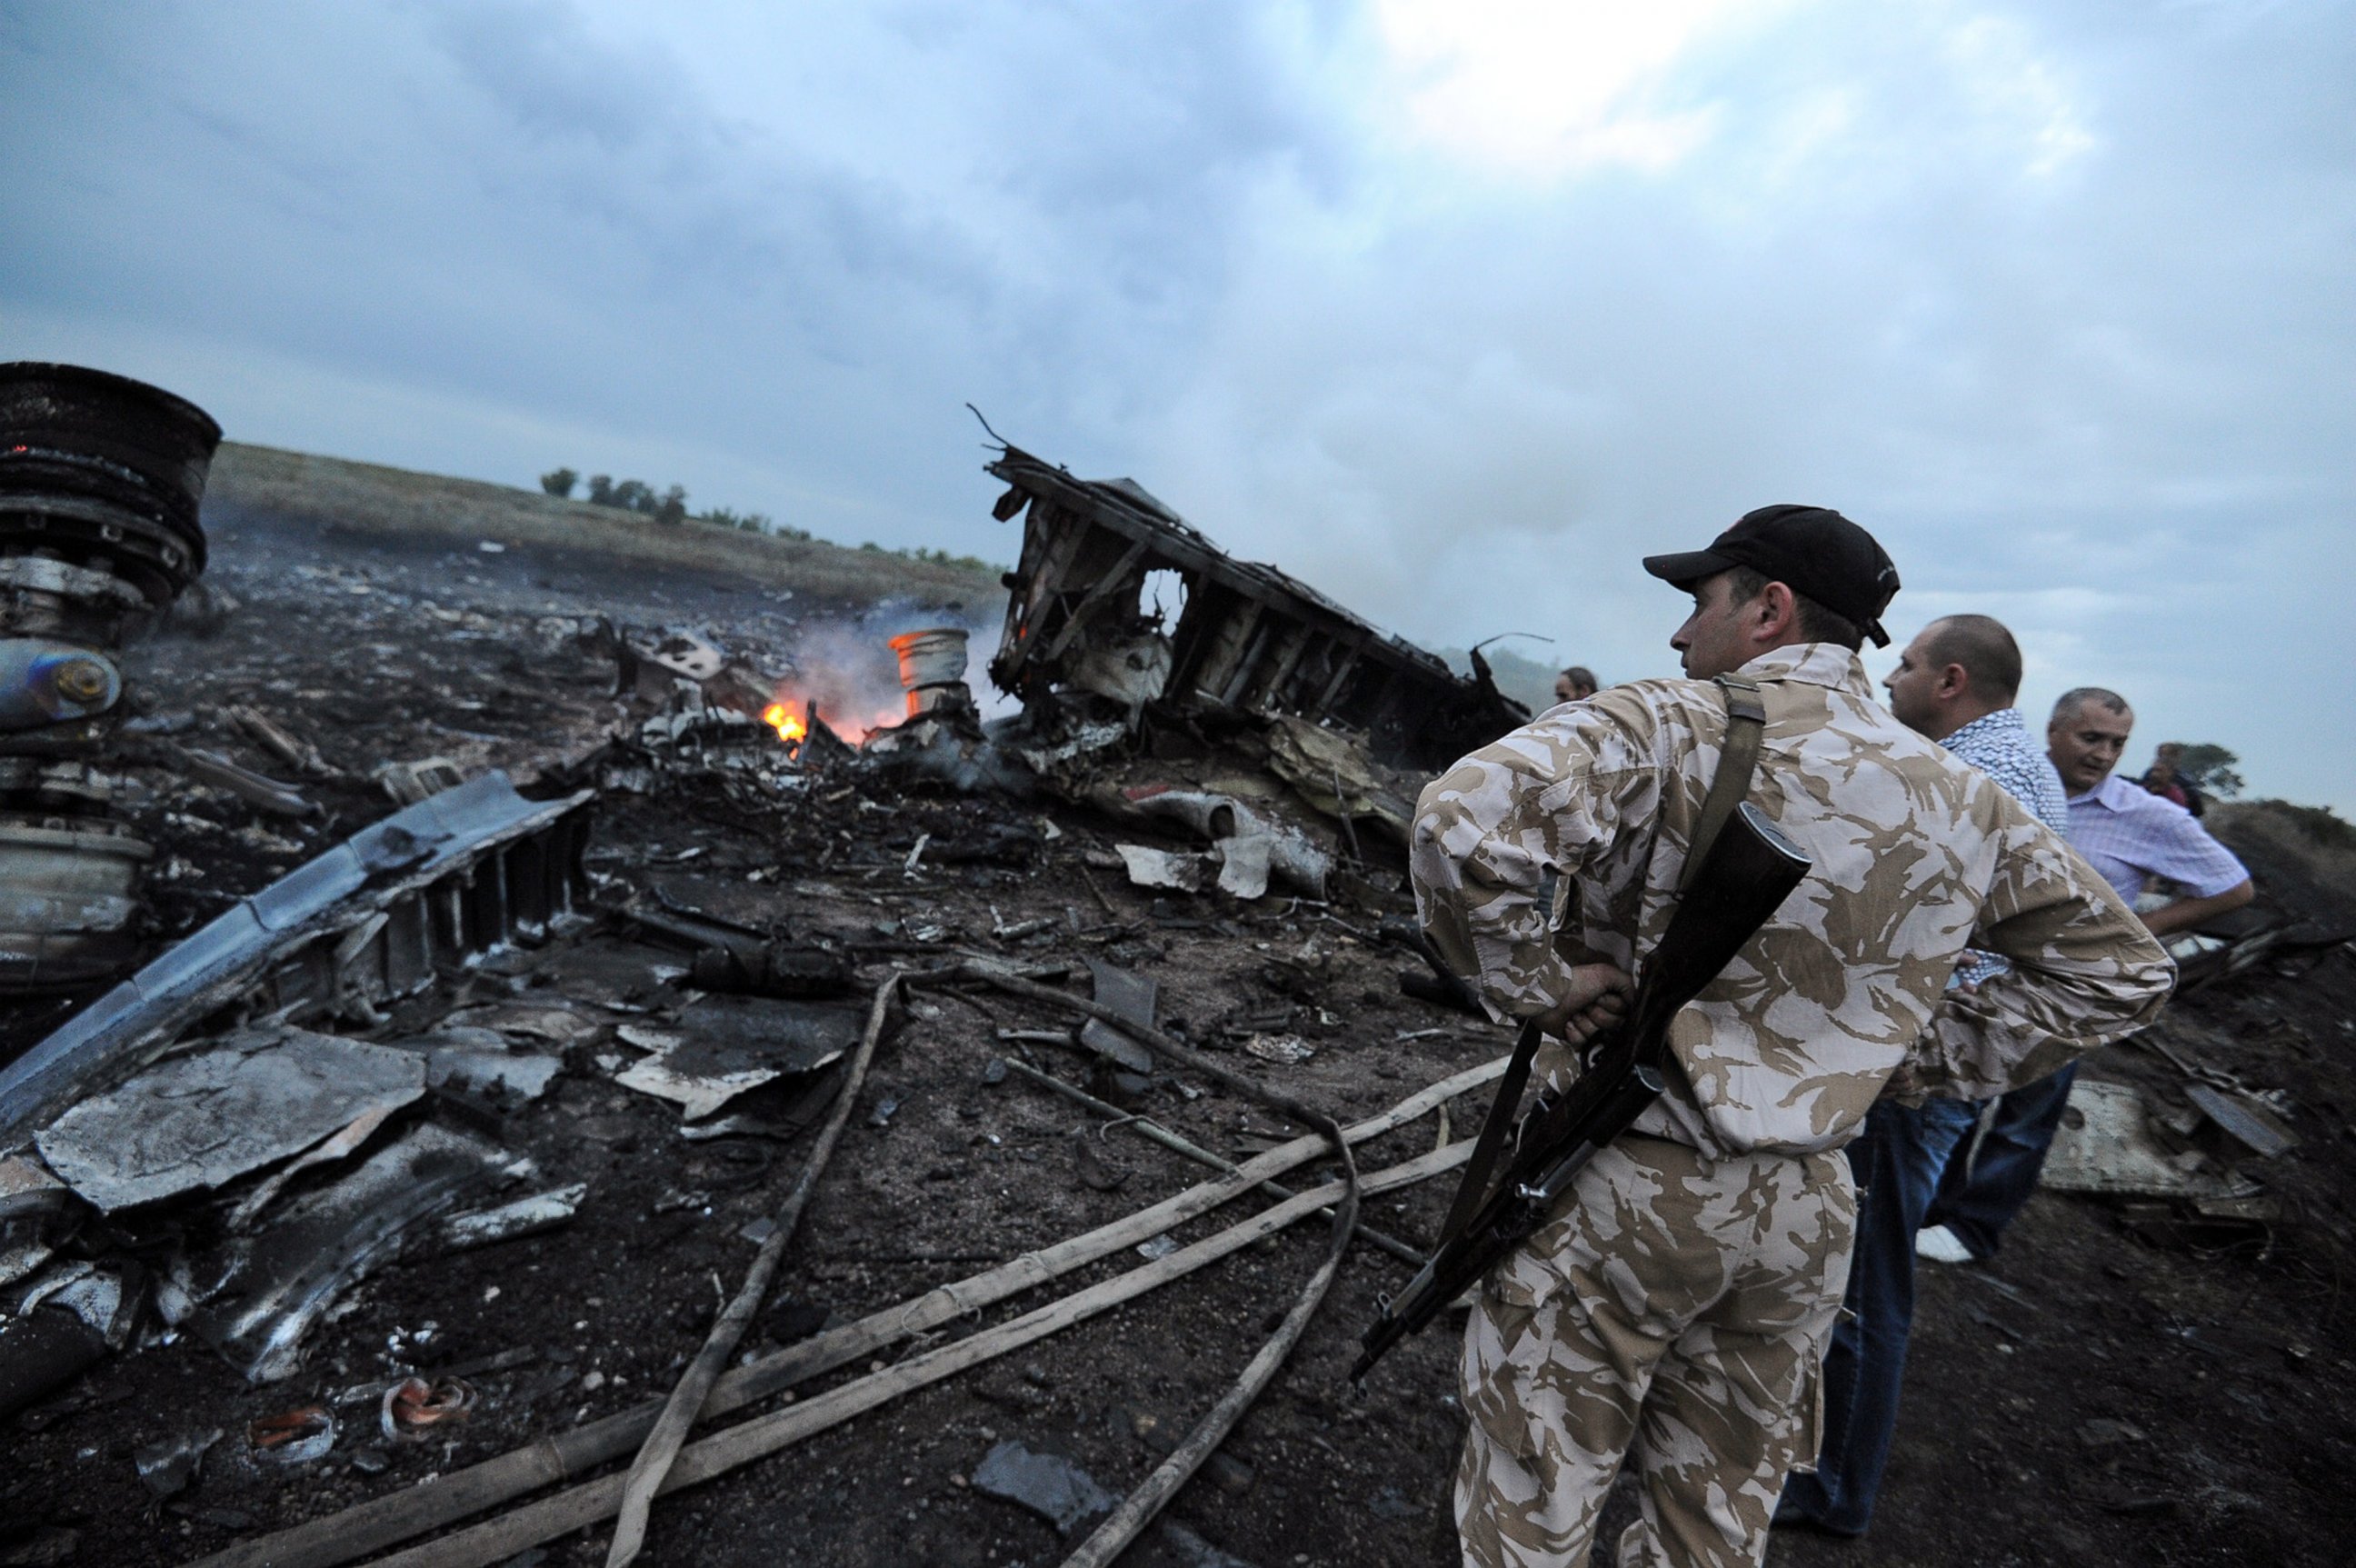 PHOTO: Men stand next to the wreckage of the Malaysian airliner that crashed near the town of Shaktarsk in rebel-held east Ukraine on July 17, 2014.